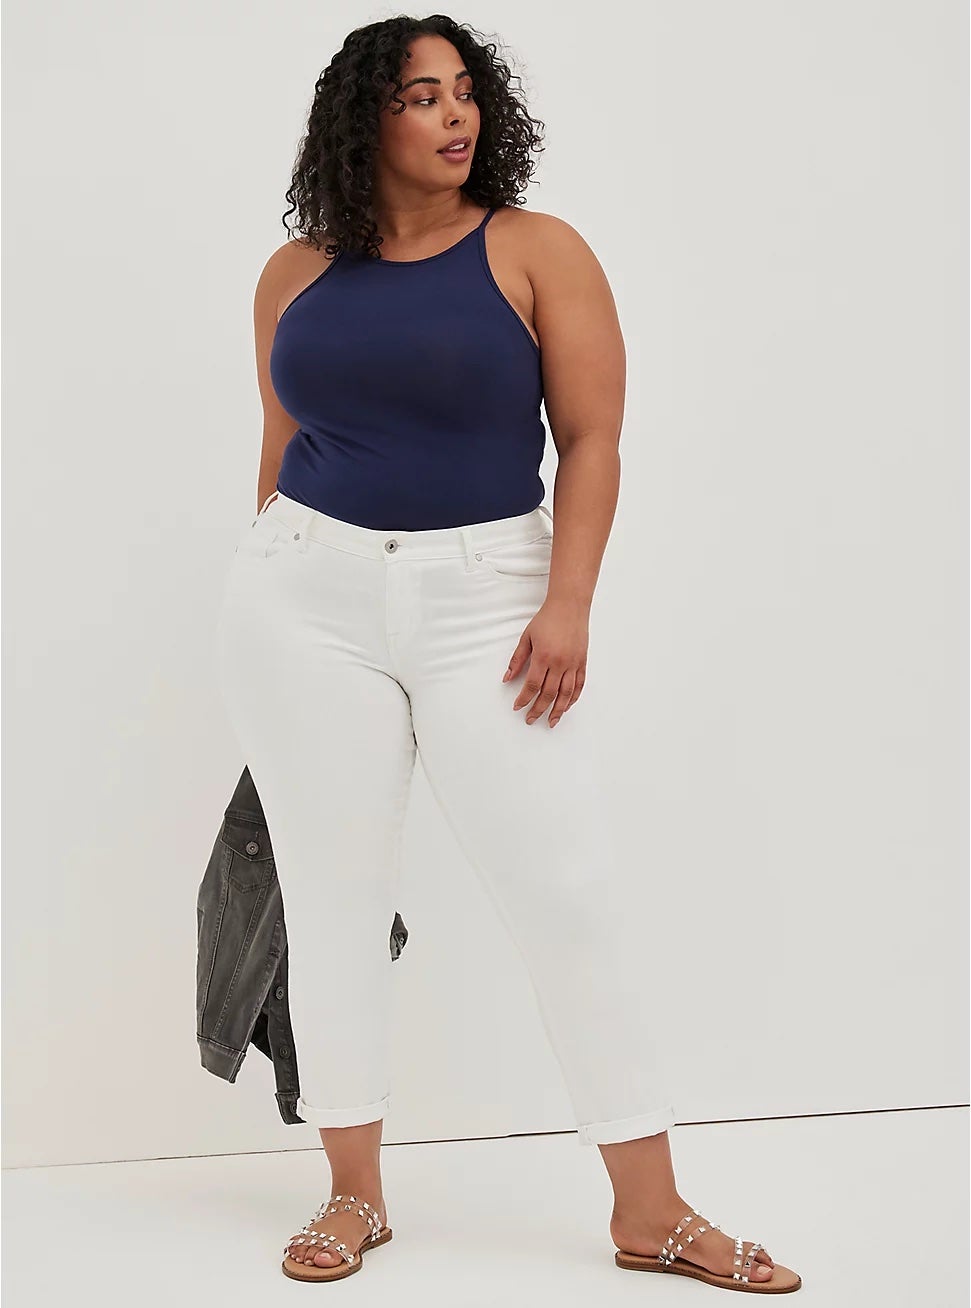 model wearing the white cuffed jeans with a navy tank and sandals